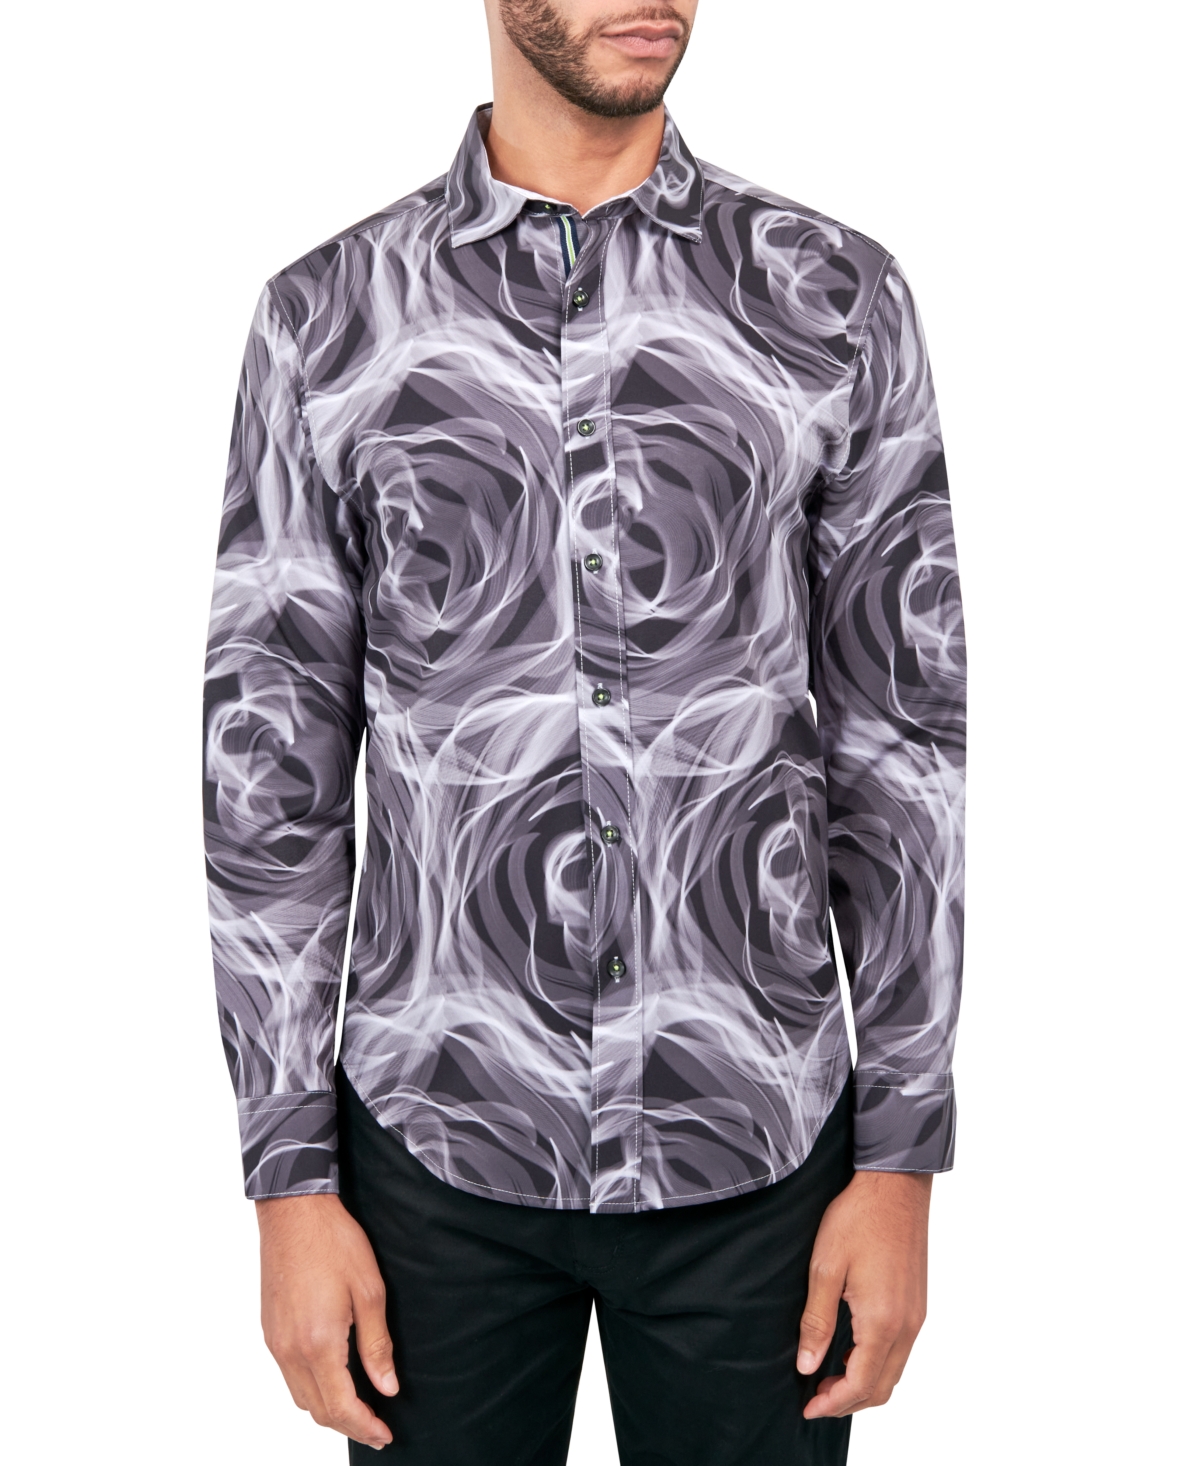 Men's Regular-Fit Non-Iron Performance Stretch Abstract Floral Button-Down Shirt - Black